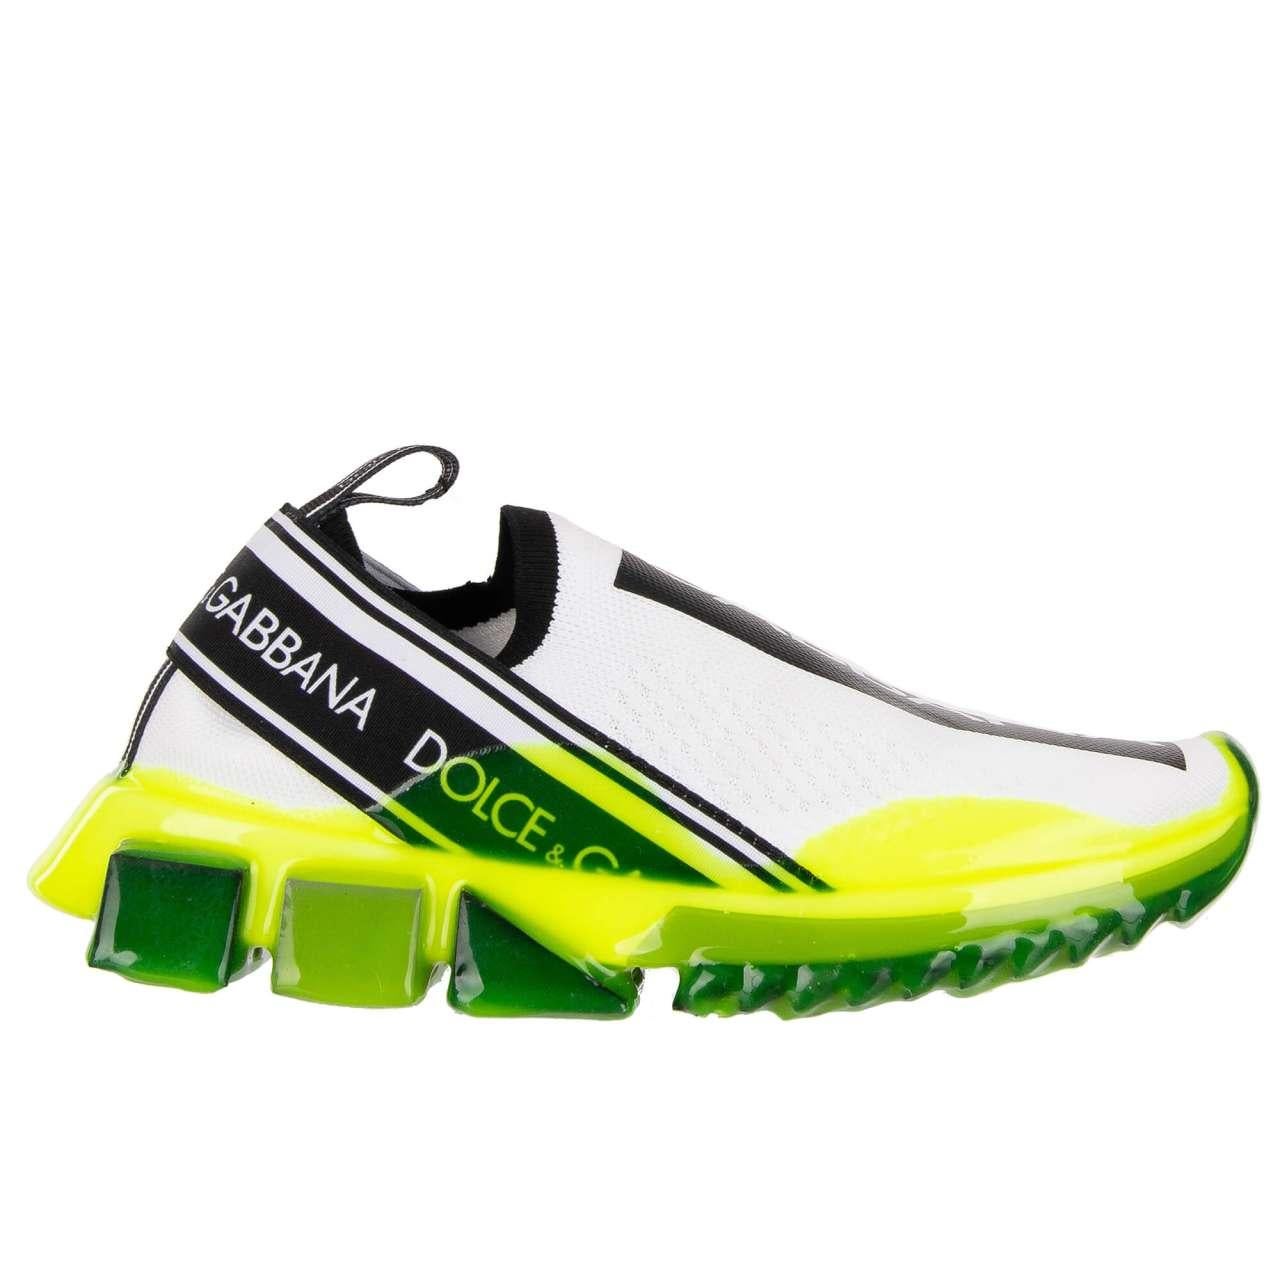 - Elastic Slip-On Sneaker SORRENTO with Dolce&Gabbana Logo stripes in white, neon yellow and black by DOLCE & GABBANA - New with Box - MADE IN ITALY - Former RRP: EUR 645 - Model: CK1595-AK235-8R154 - Material: 70% Polyester, 15% Viscose, 10% Nylon,